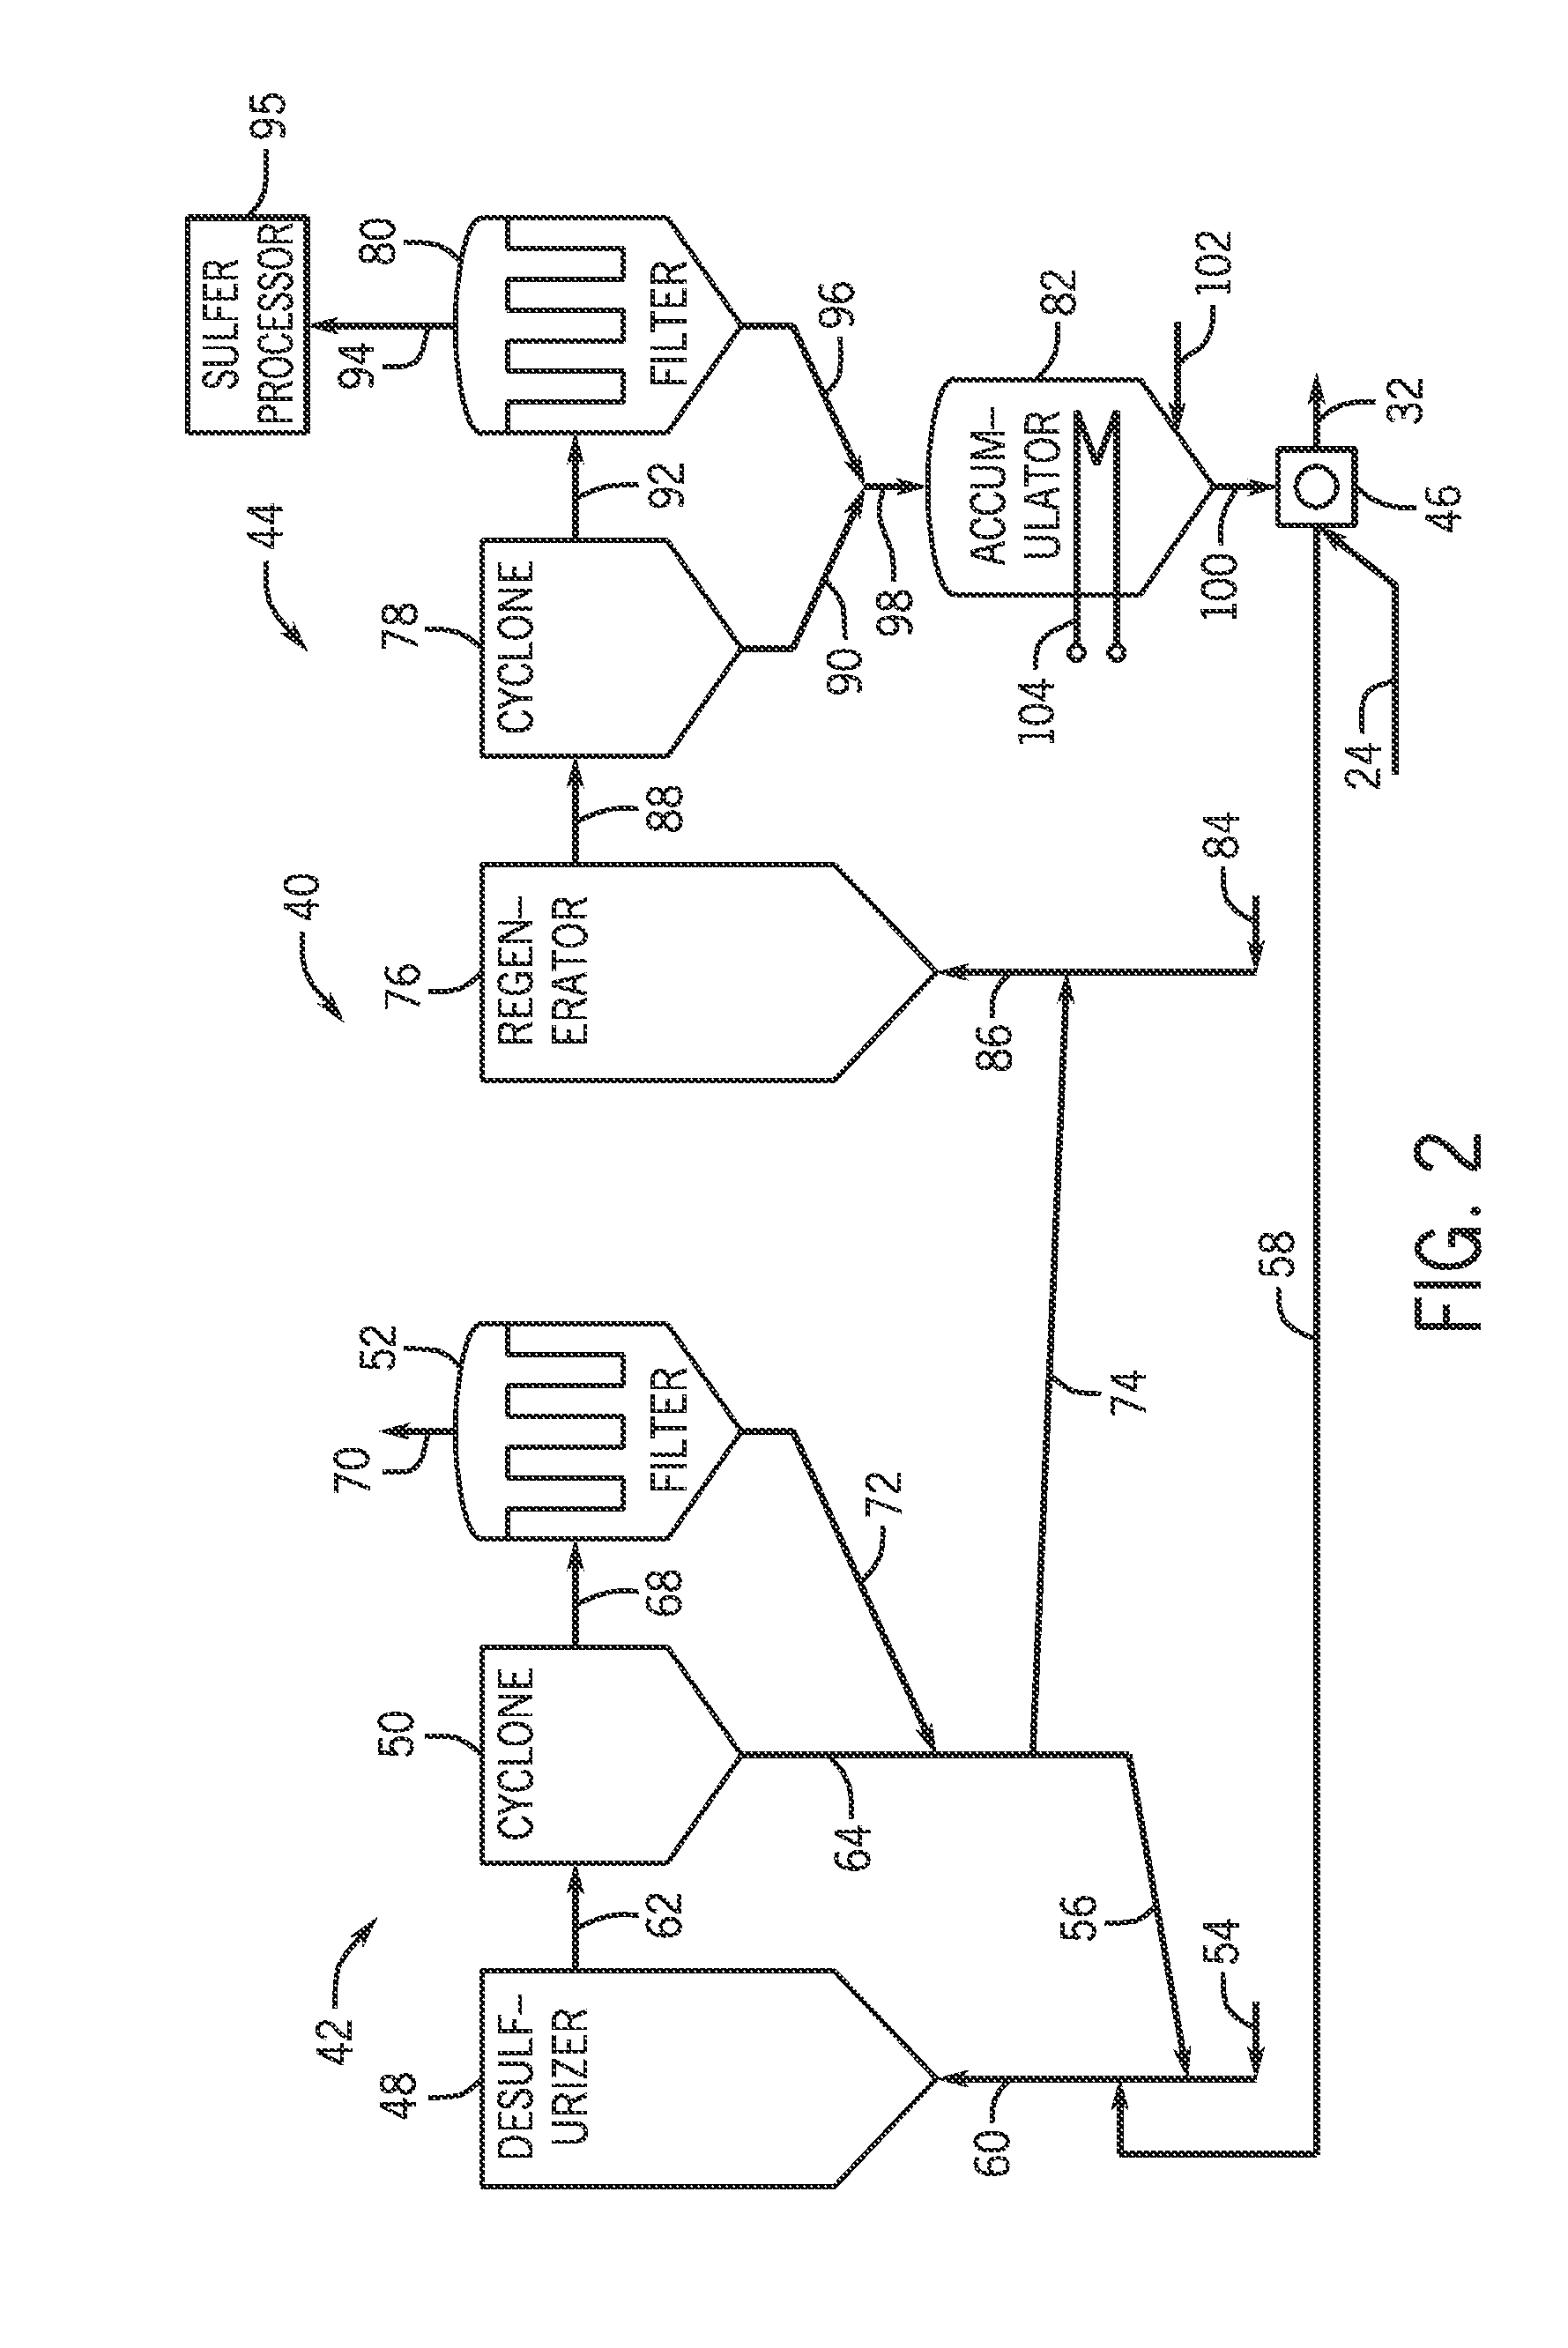 System and method for conveying solids